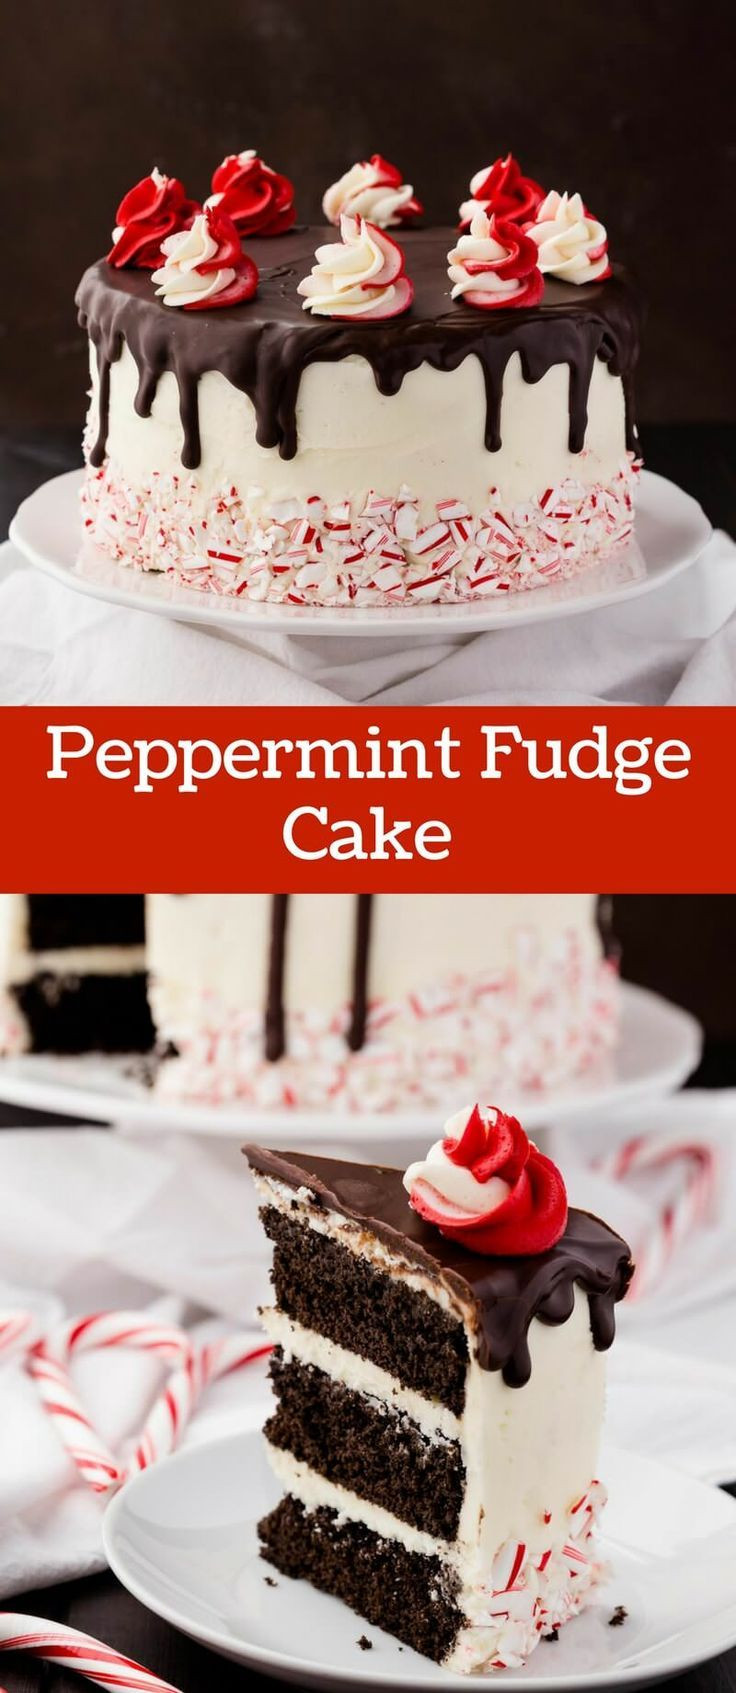 Christmas Pies And Cakes
 1000 ideas about Christmas Cakes on Pinterest